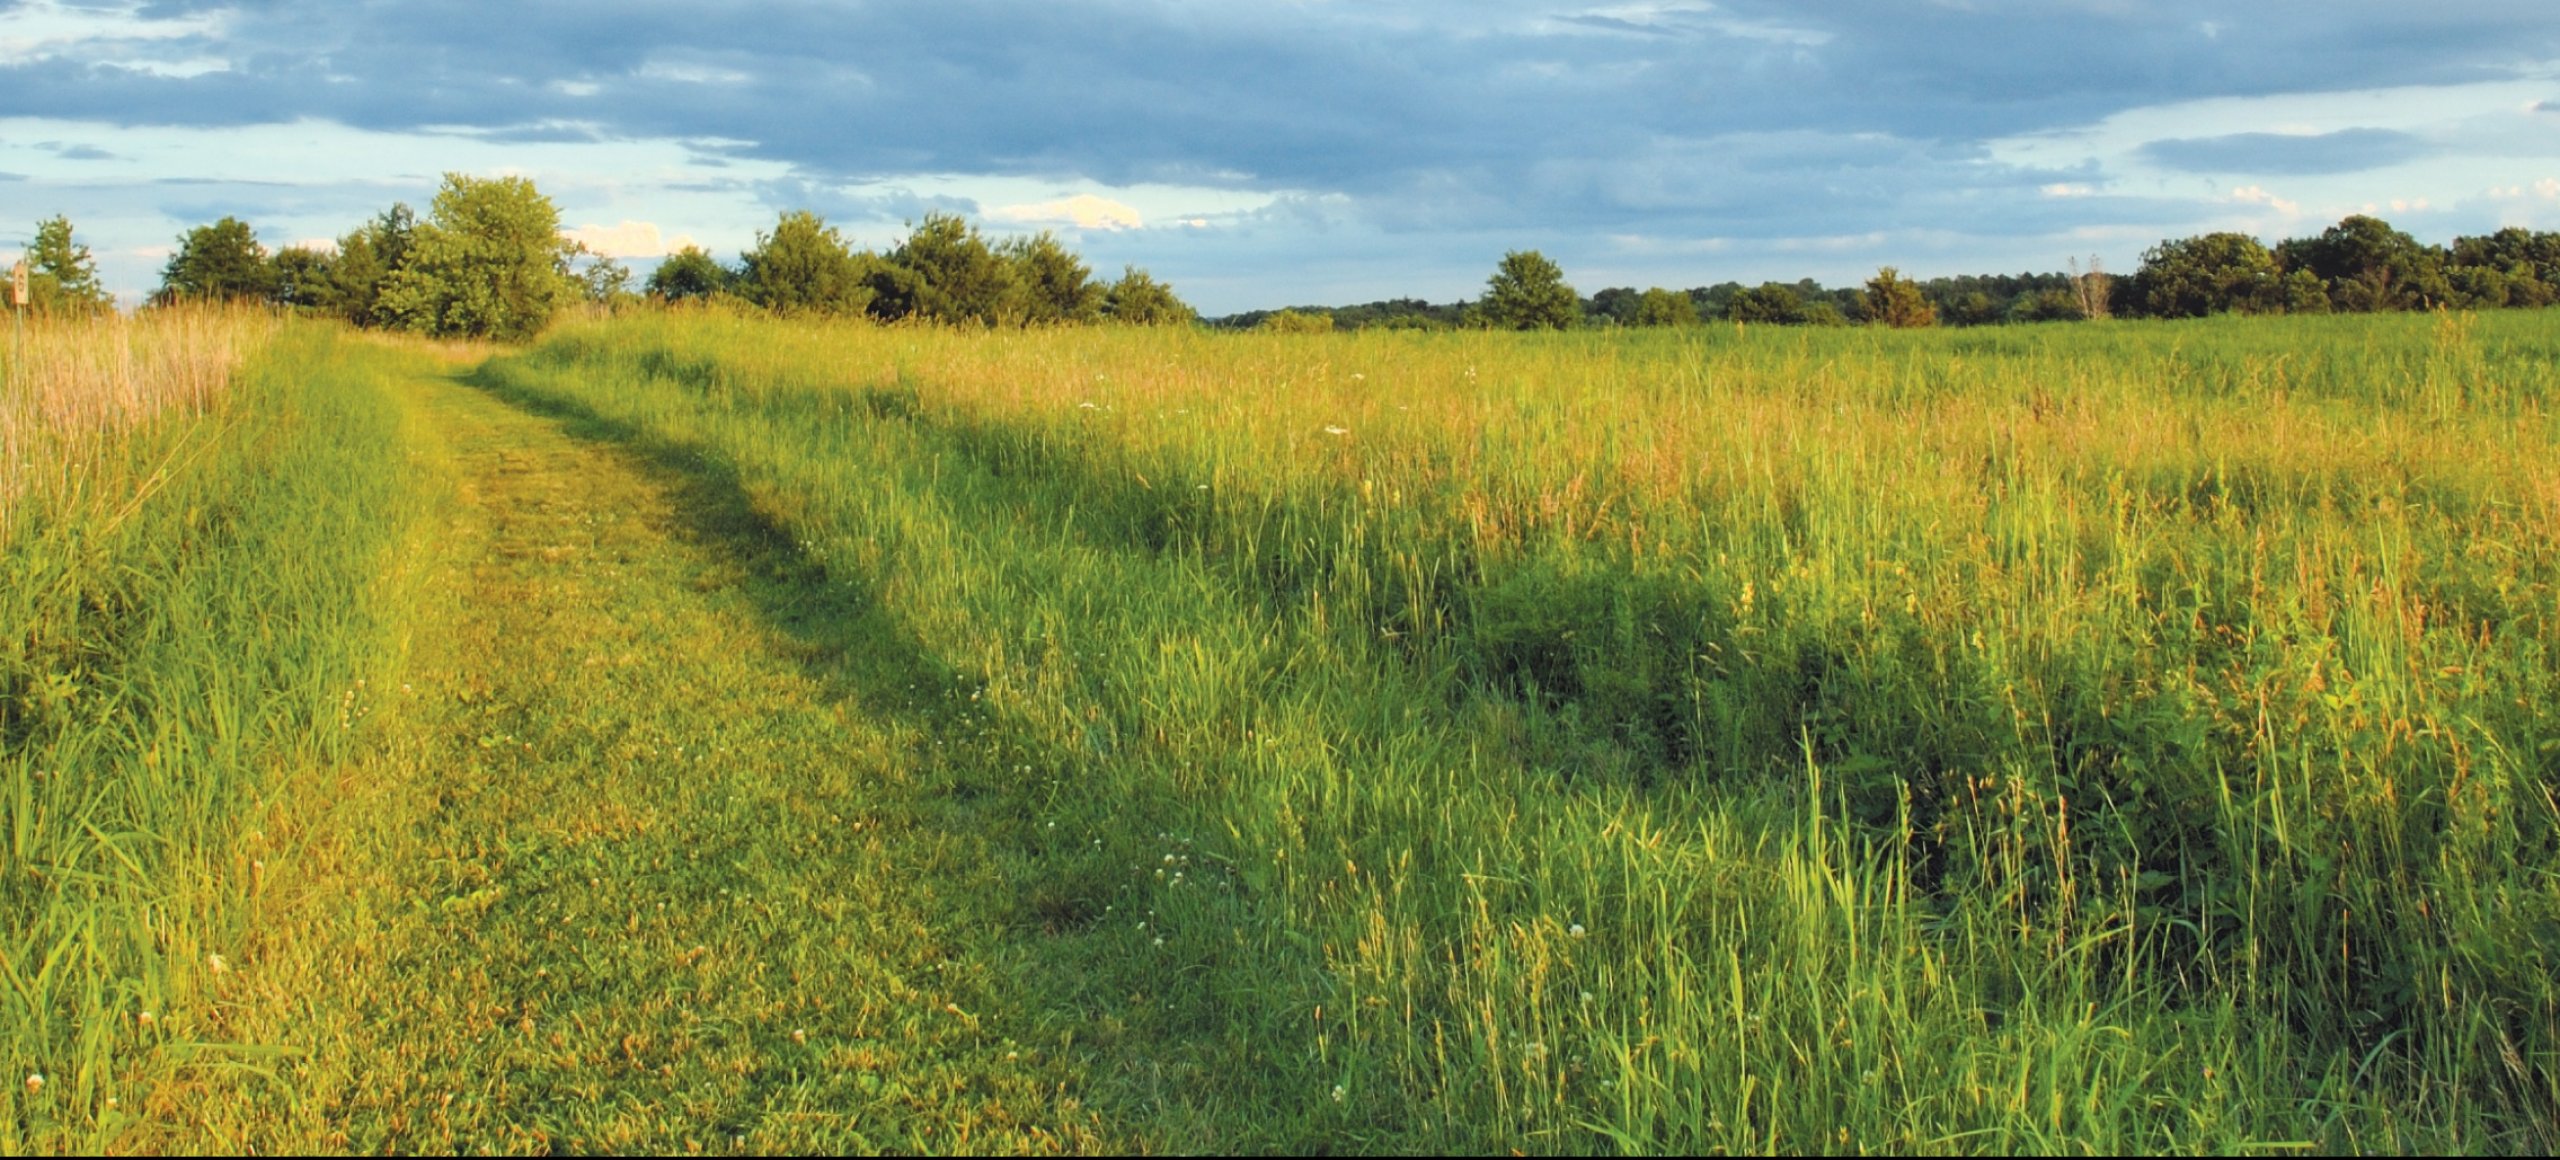 A grassy trail leads through a green field towards a line of trees with a a blue, cloudy sky in the background.